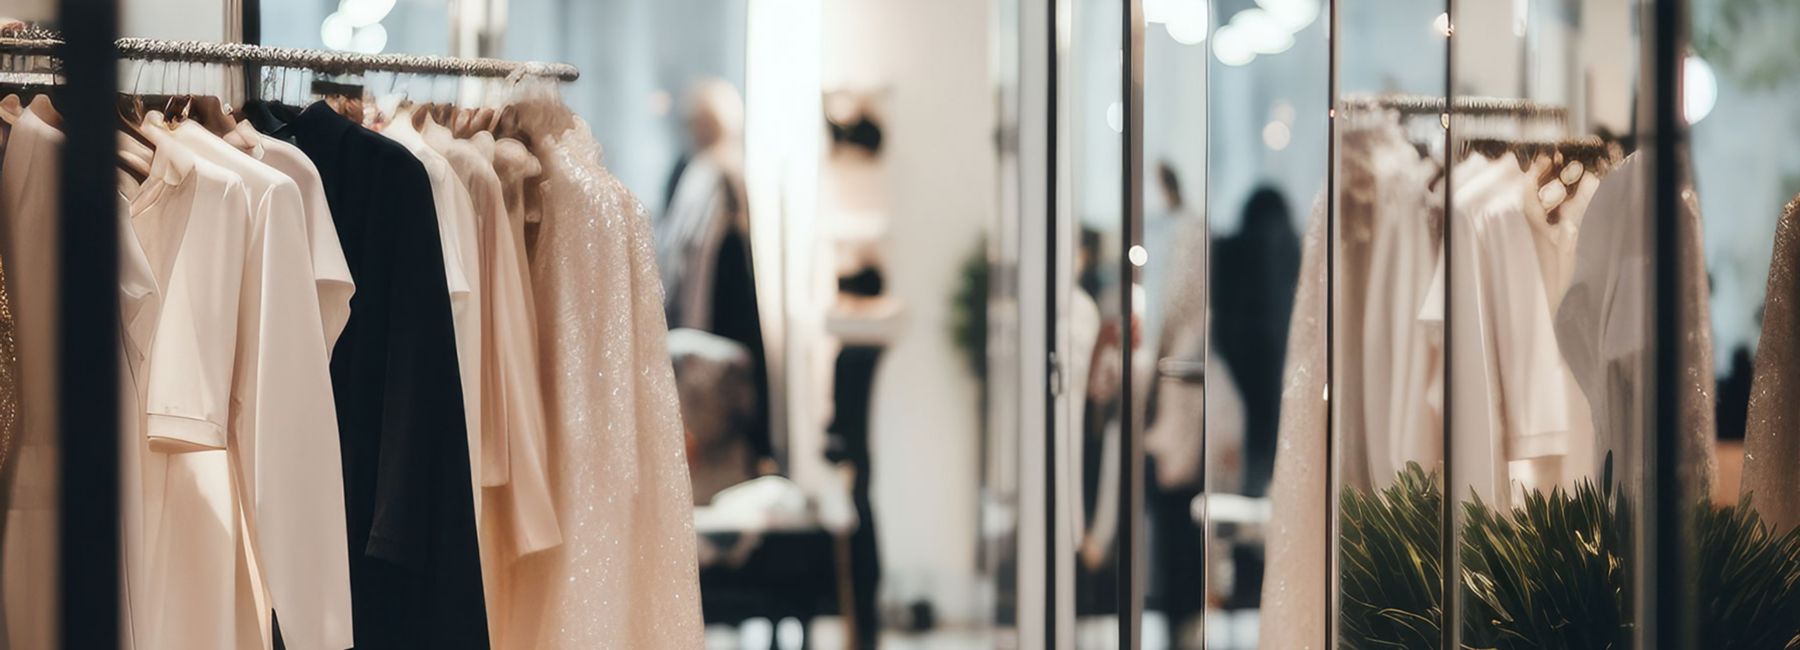 Dynamics 365 key to growth ambitions for speciality fashion retailer